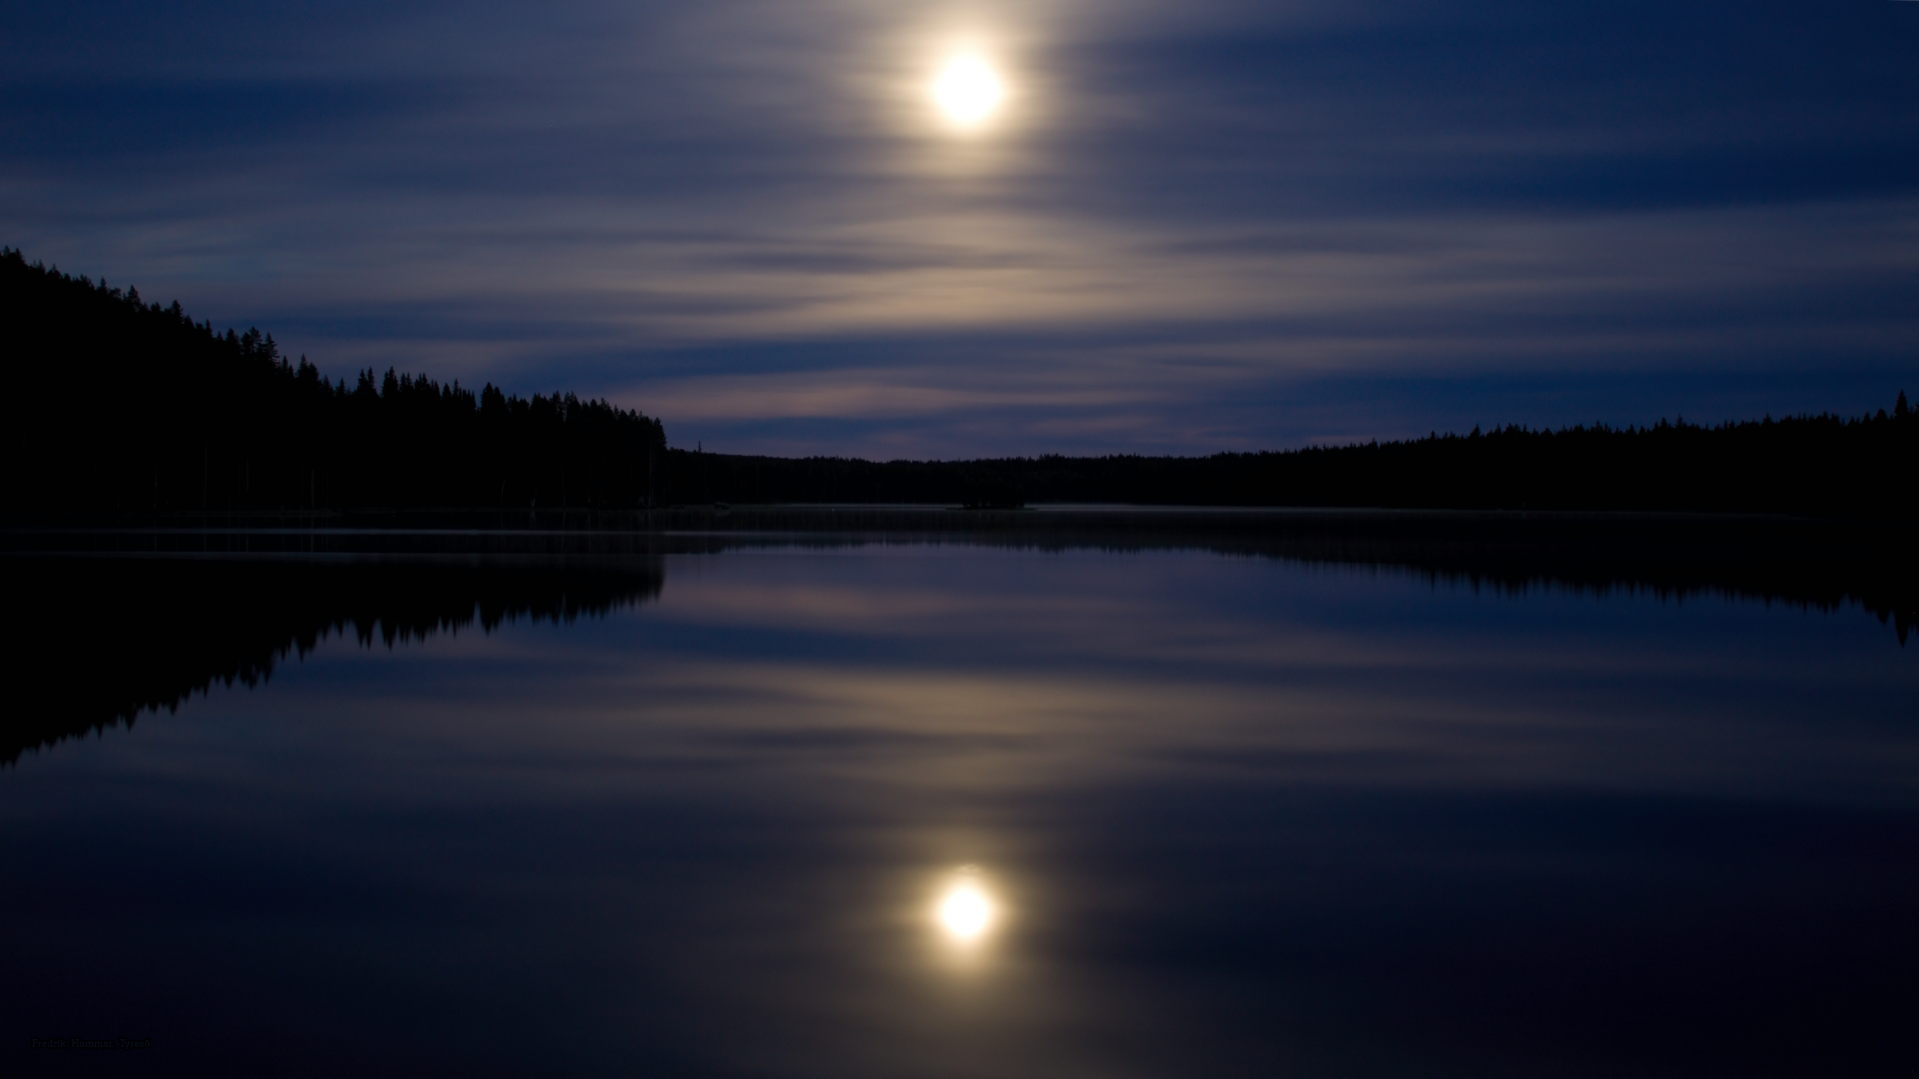 Moon over the forest and water